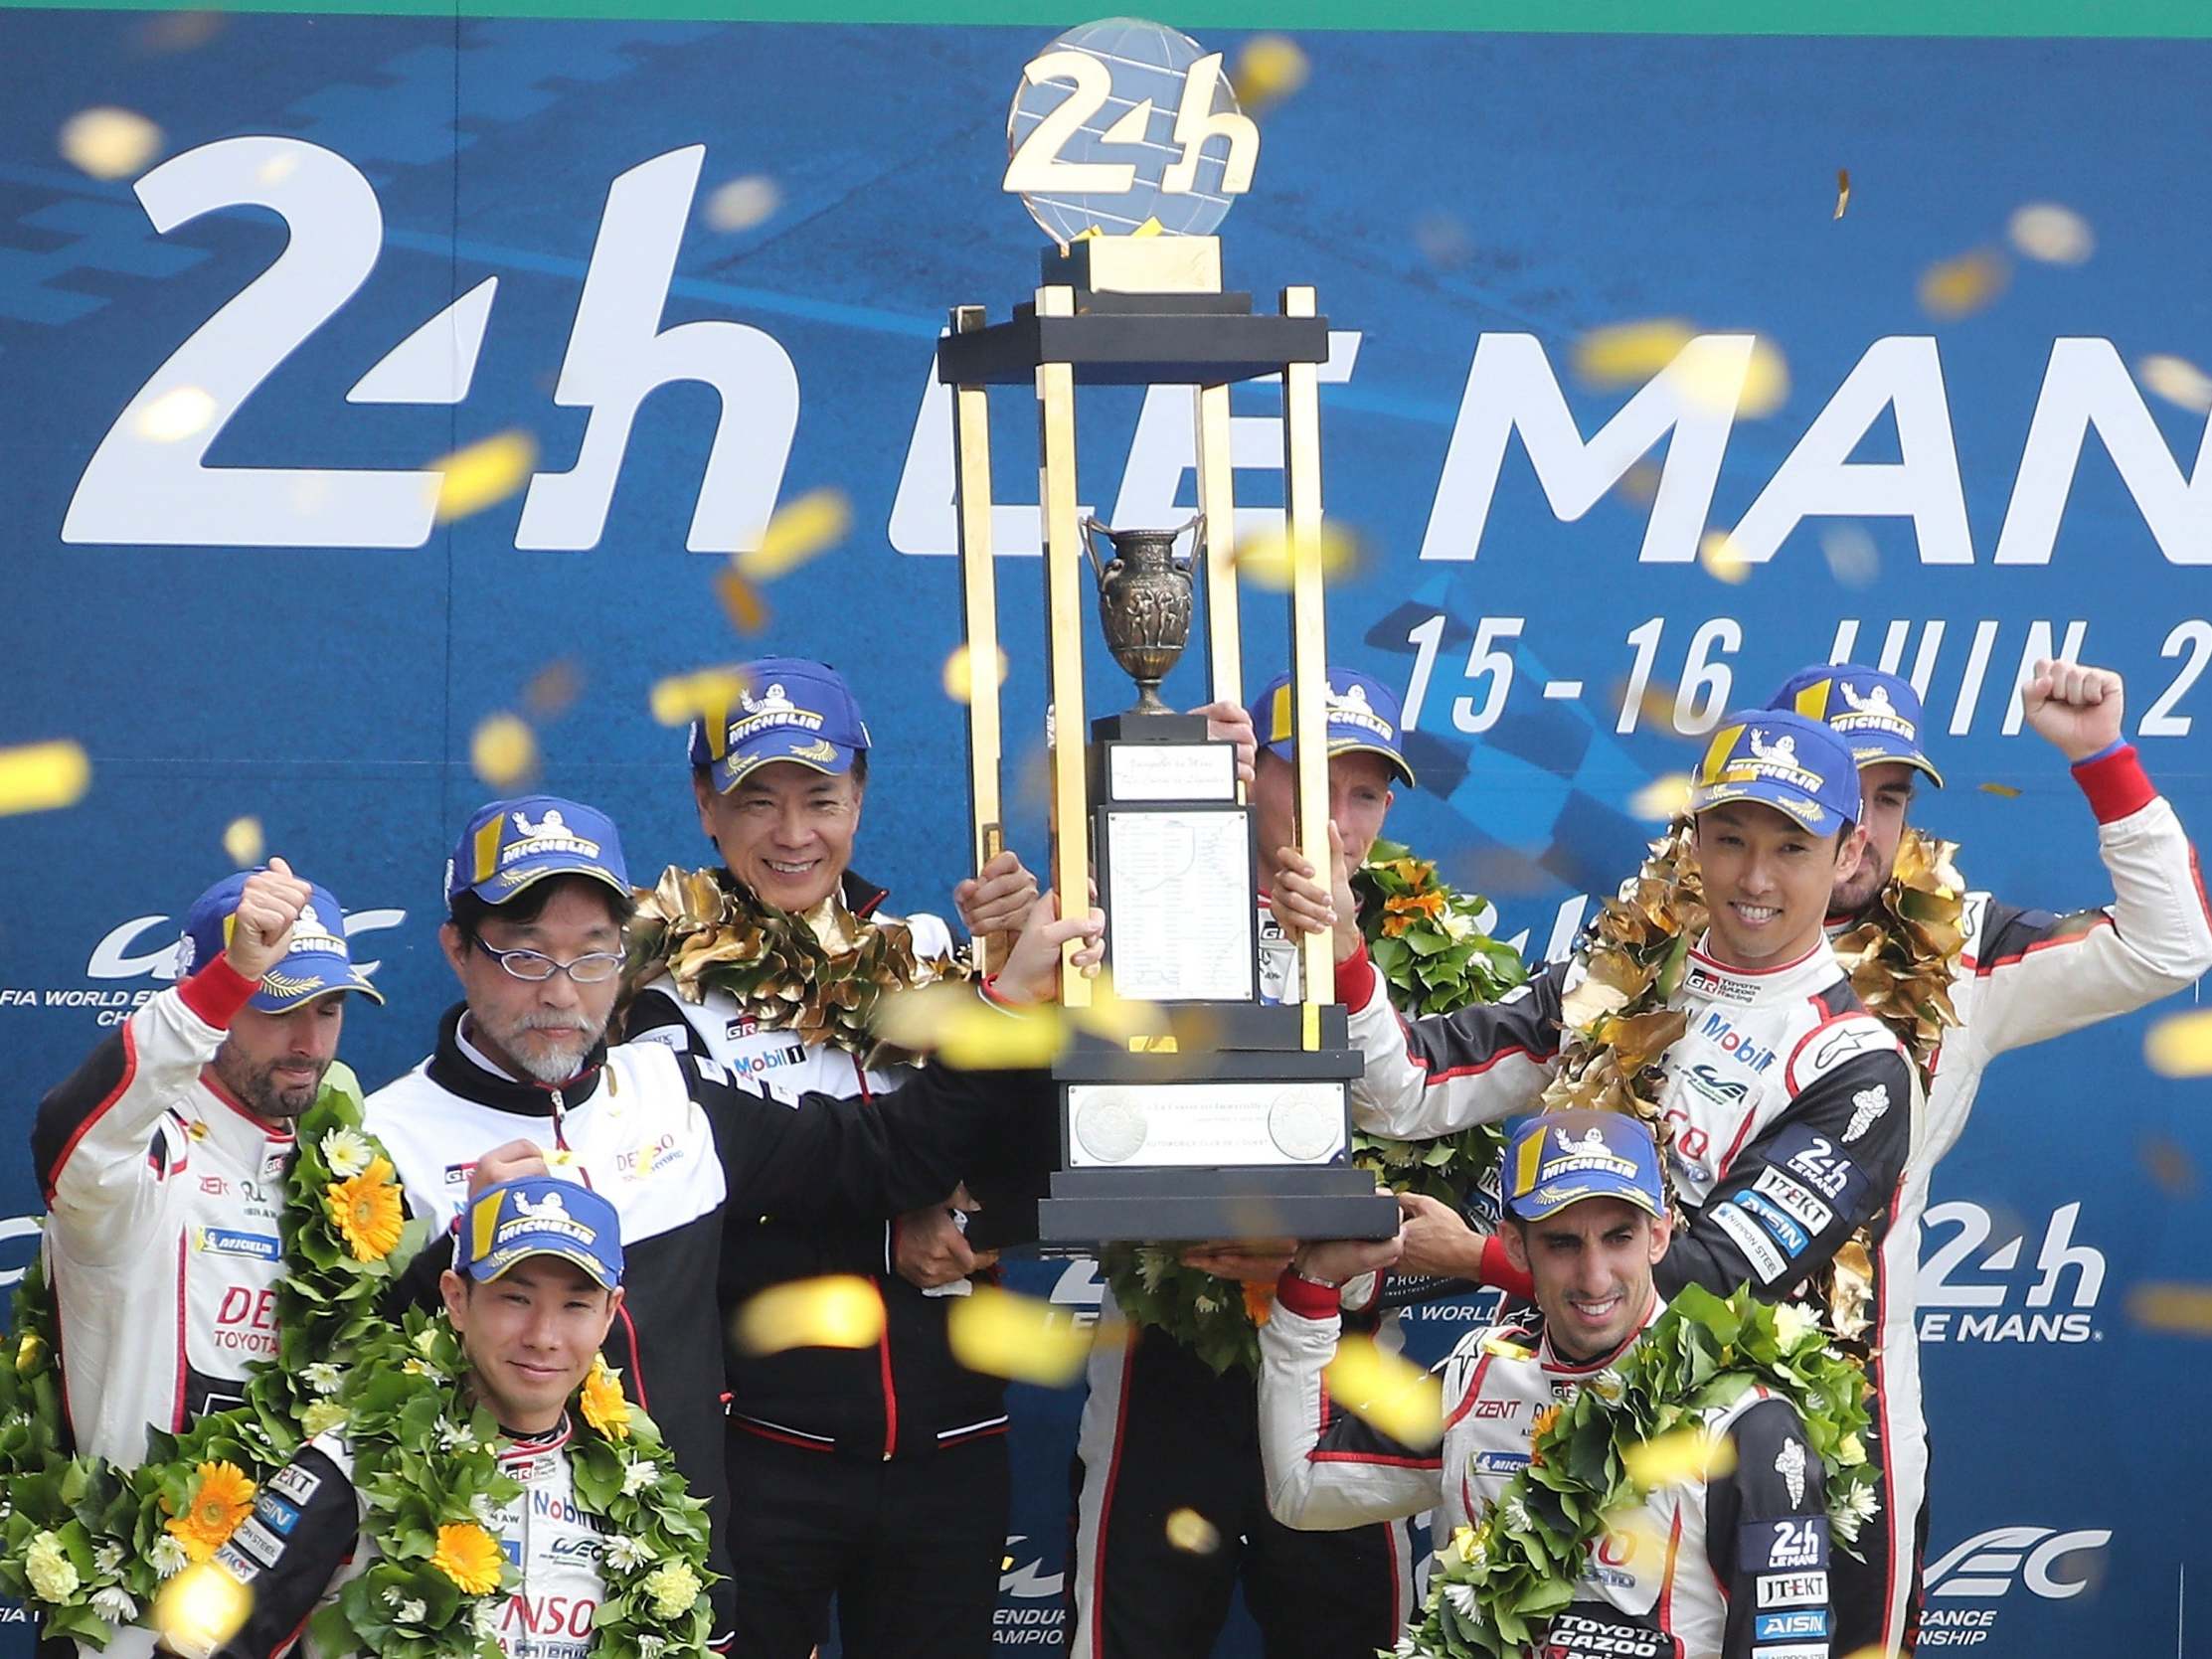 Le Mans 2019 results Toyota win 24 Hours race in dramatic finish as No 7 car loses lead late to Alonsos No 8 The Independent The Independent